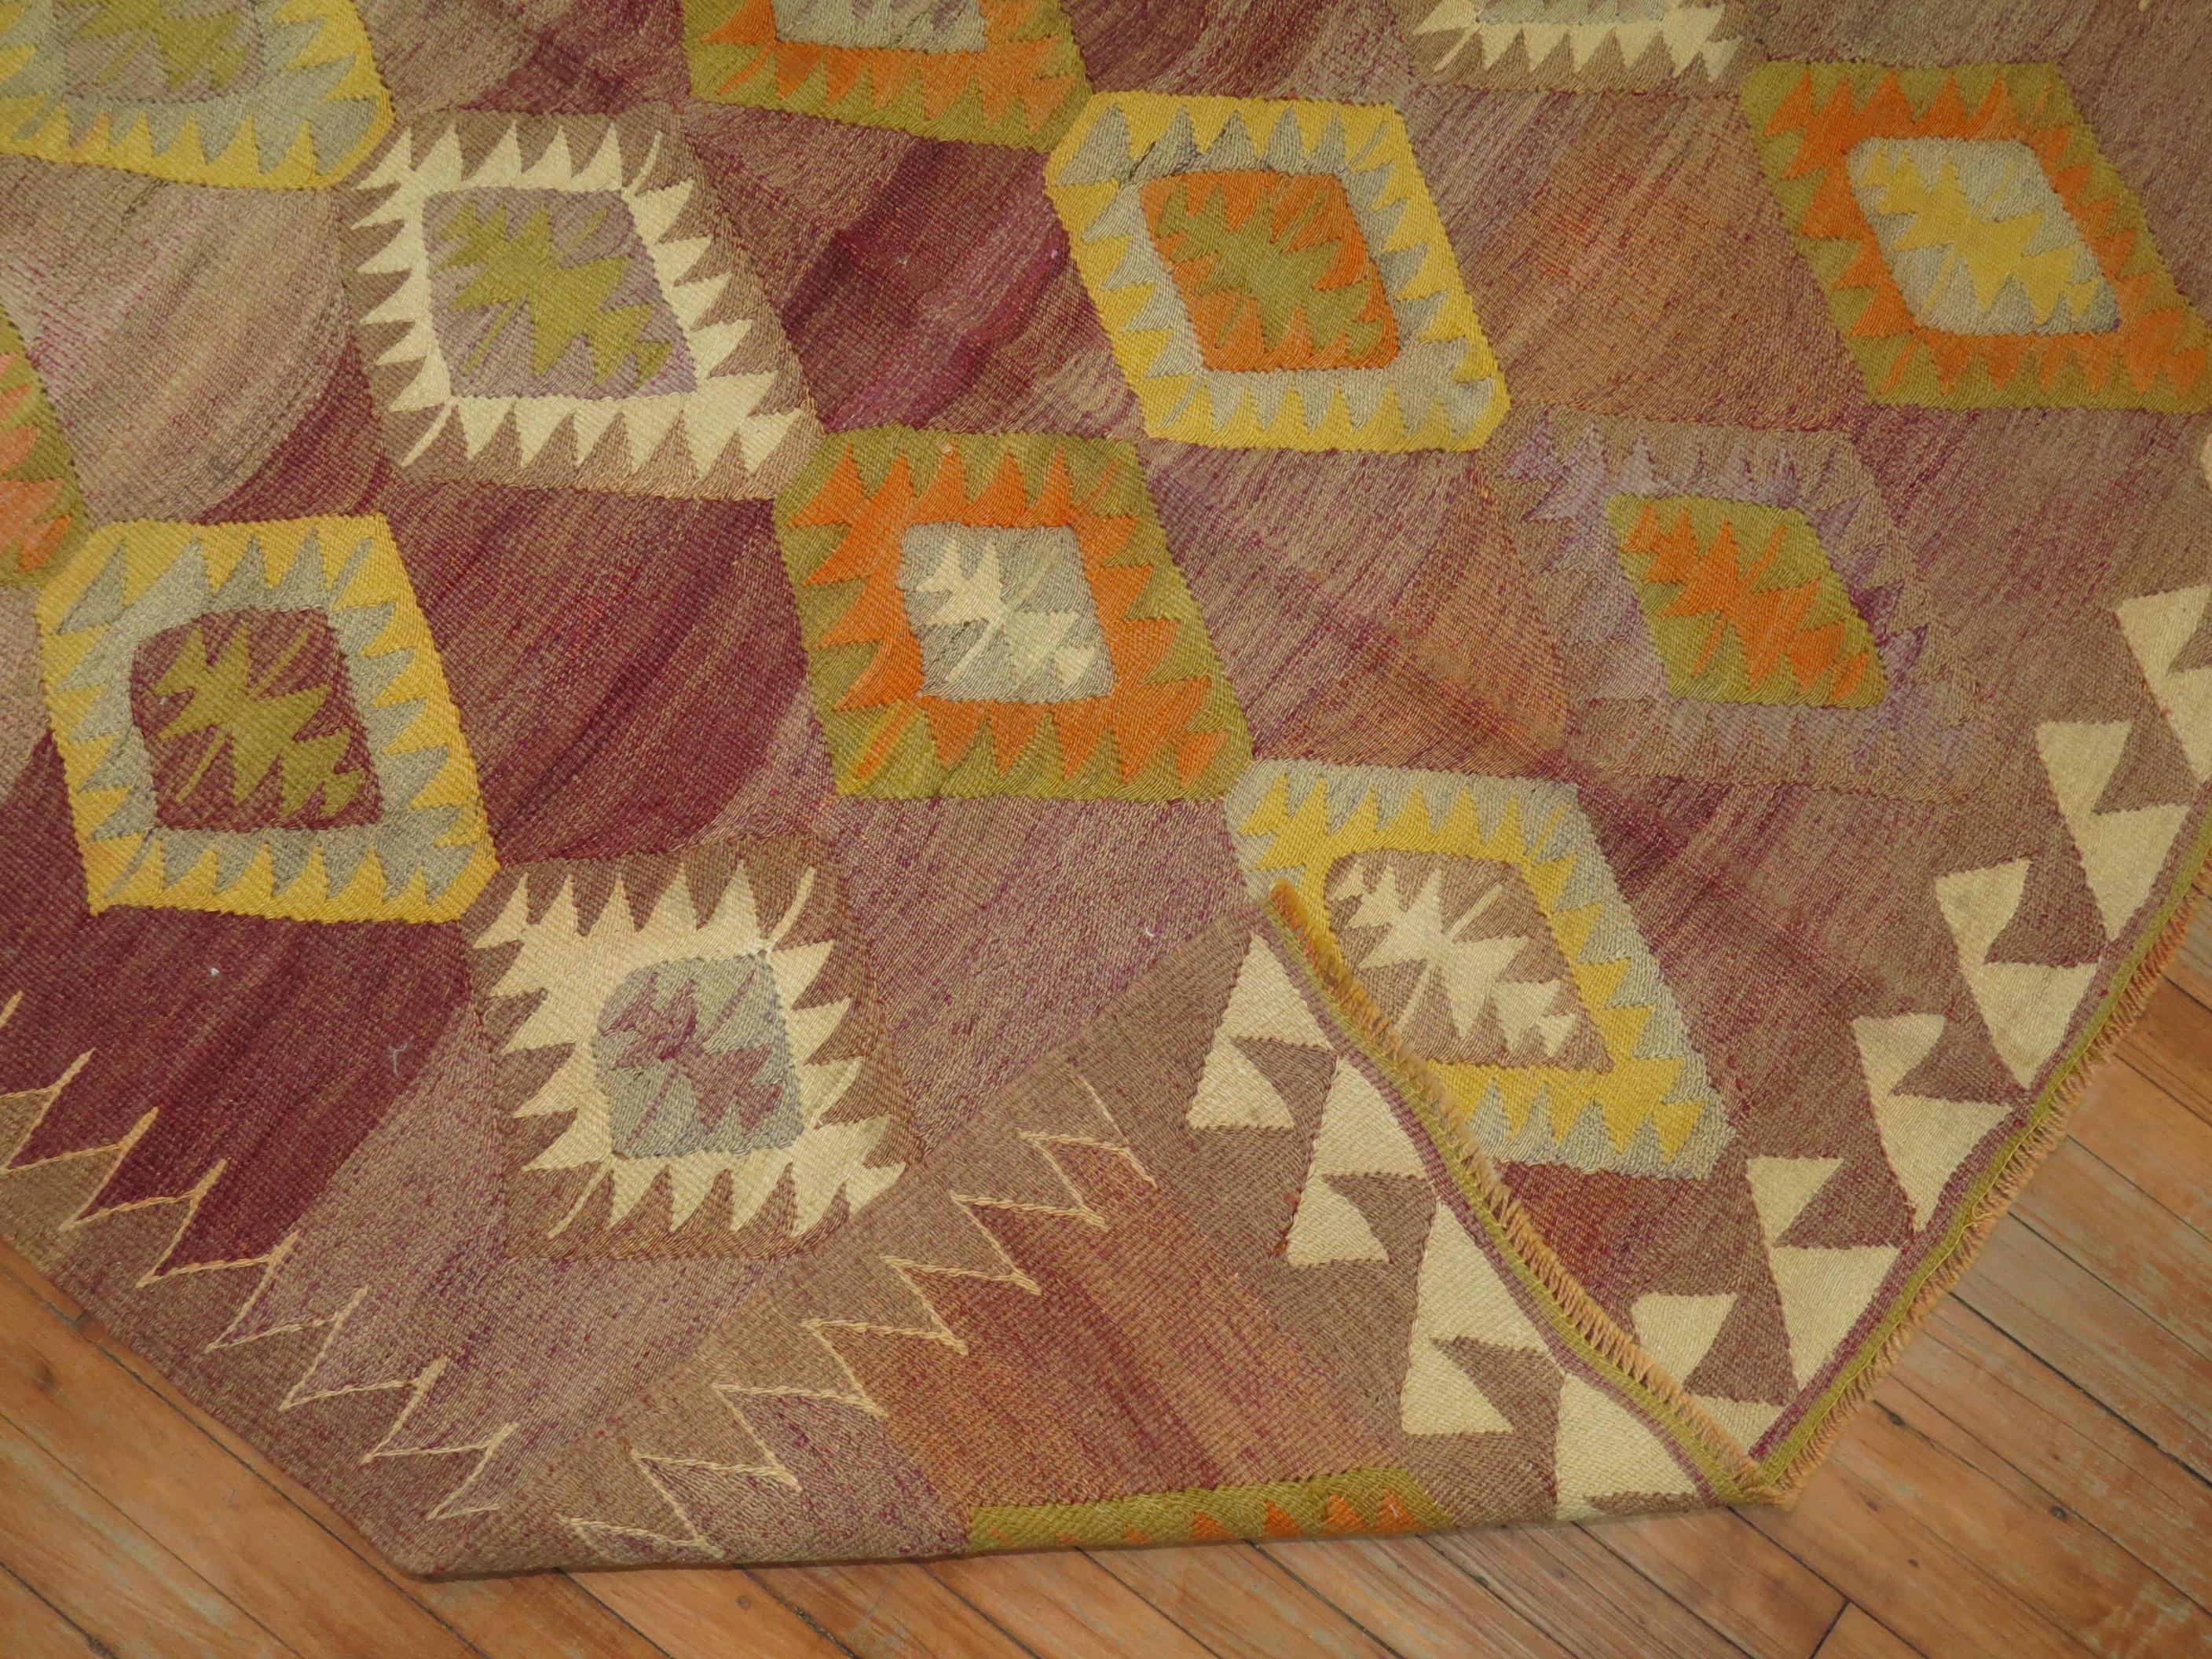 Casual mid-20th century Turkish Kilim with a geometric all-over design.